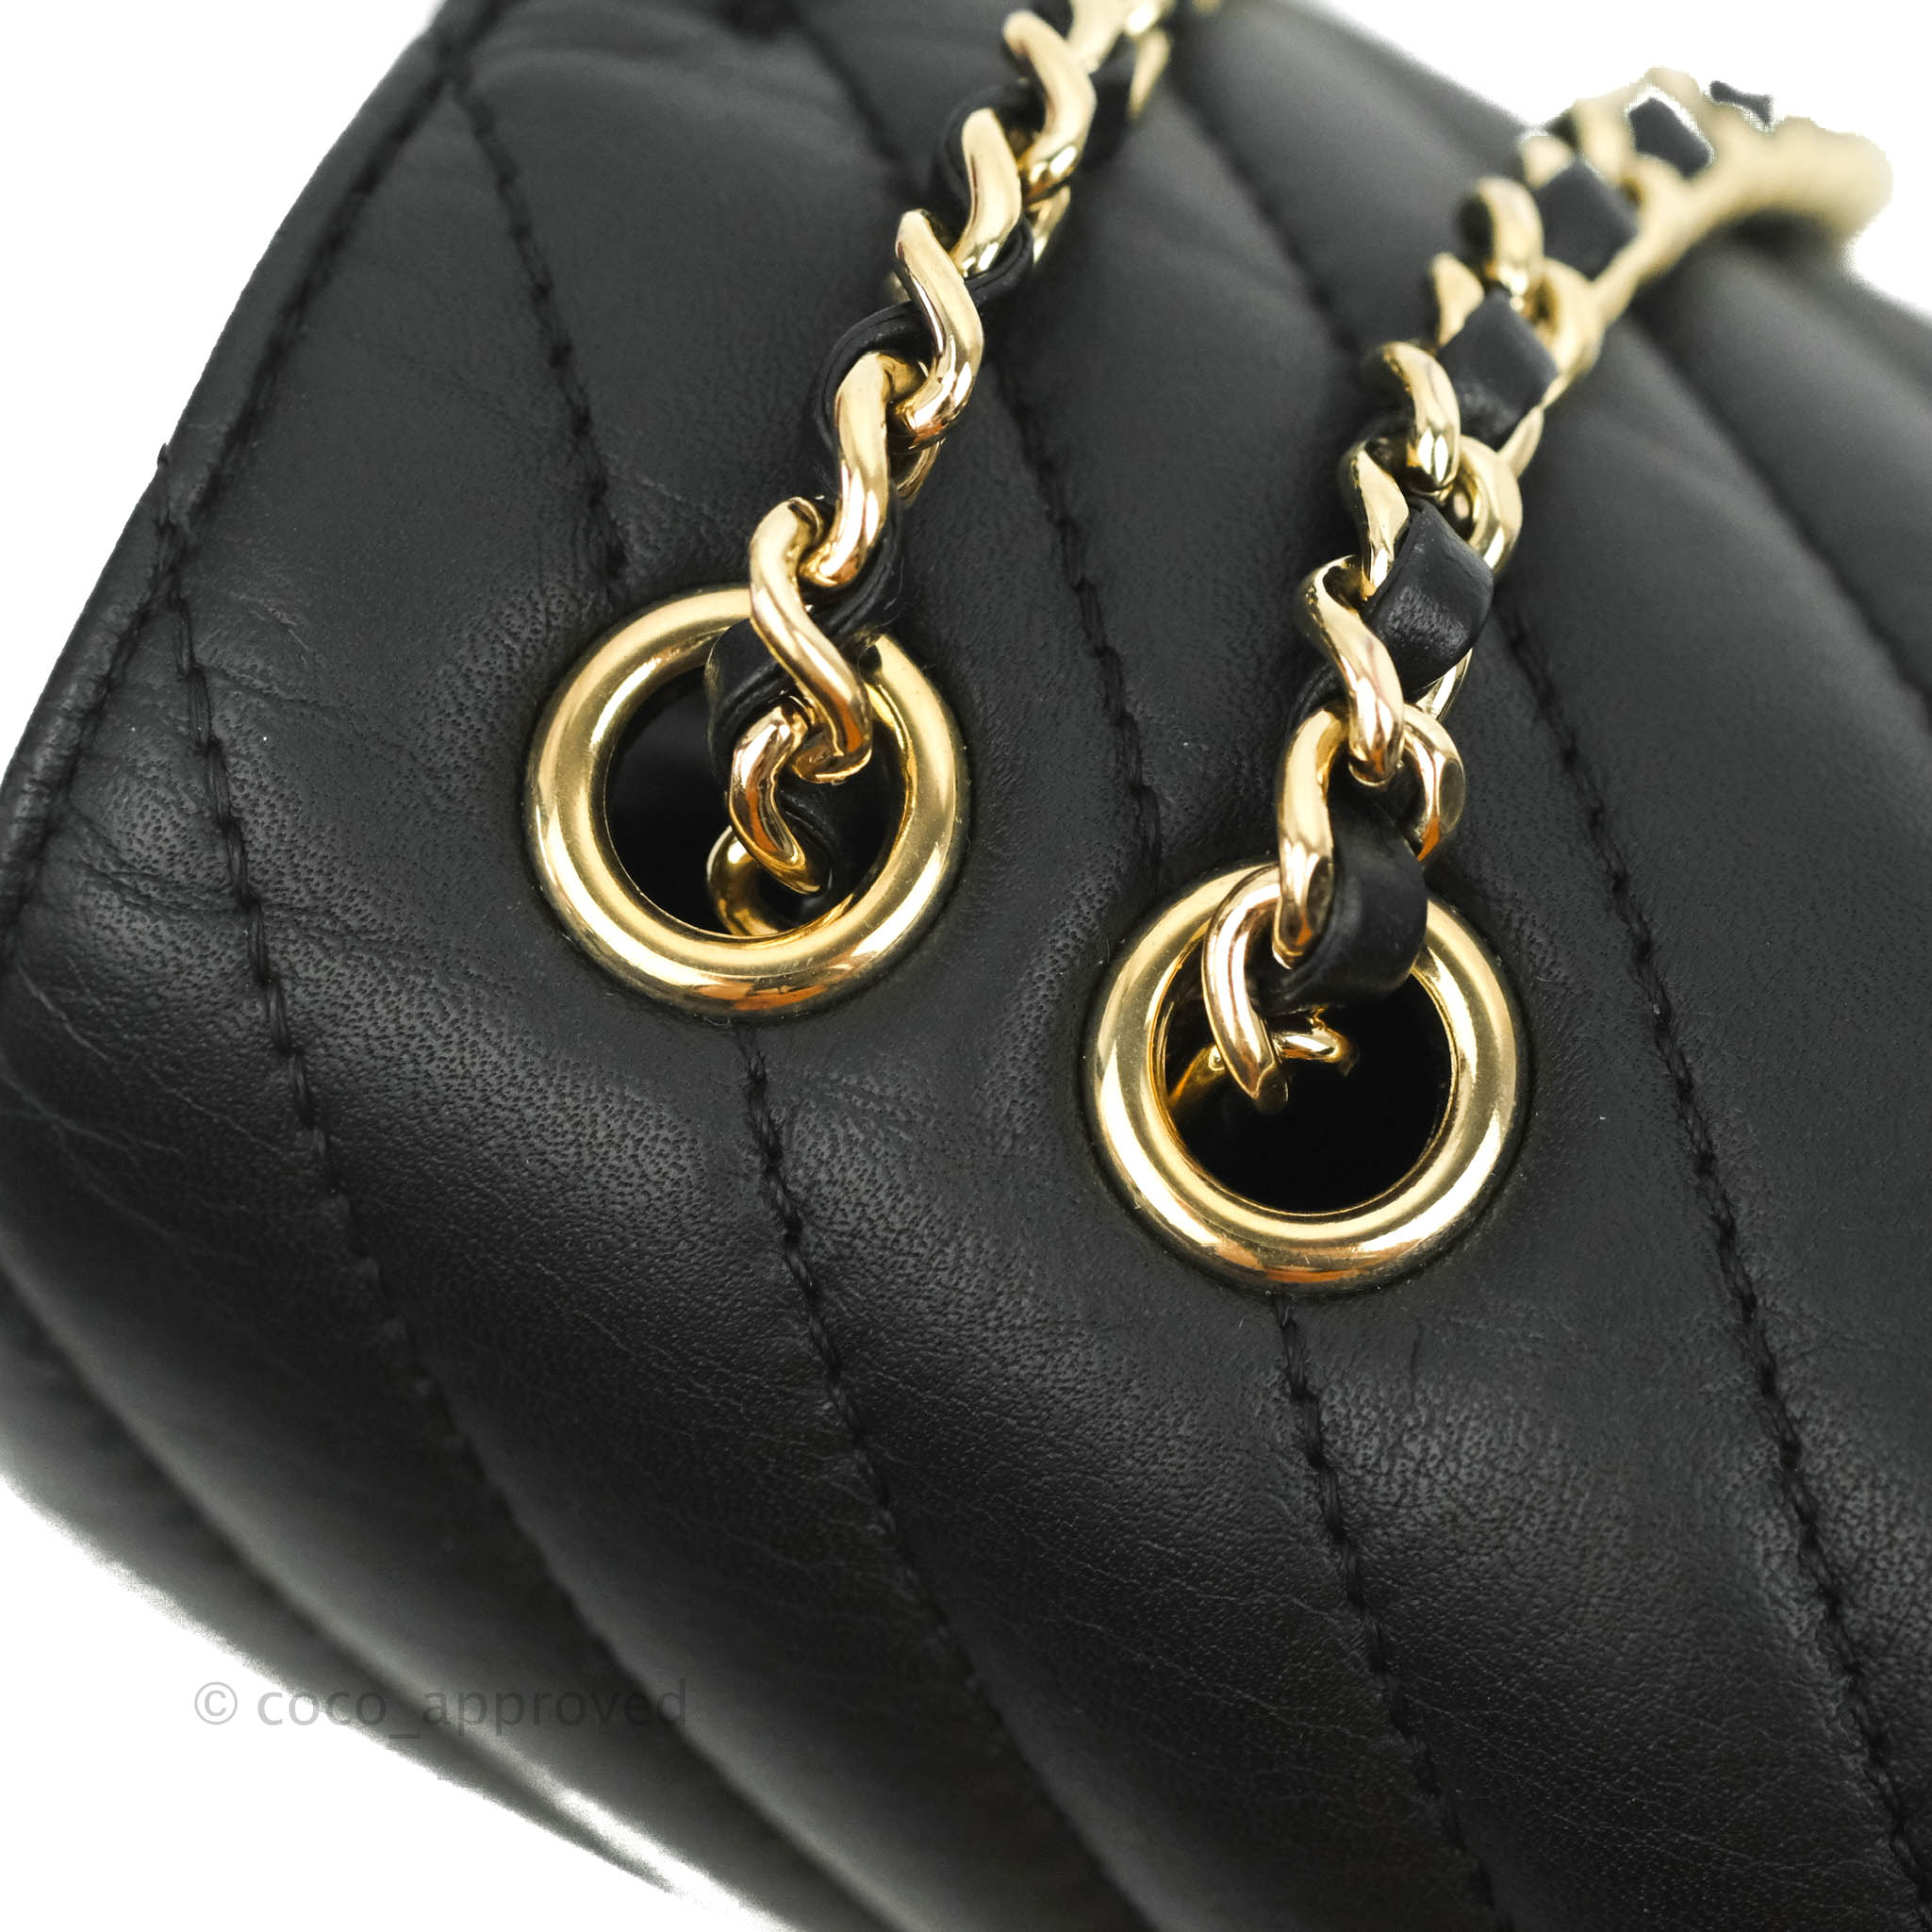 CHANEL Flap bag 2way shoulder bag chain AS1977｜Product  Code：2104101889149｜BRAND OFF Online Store